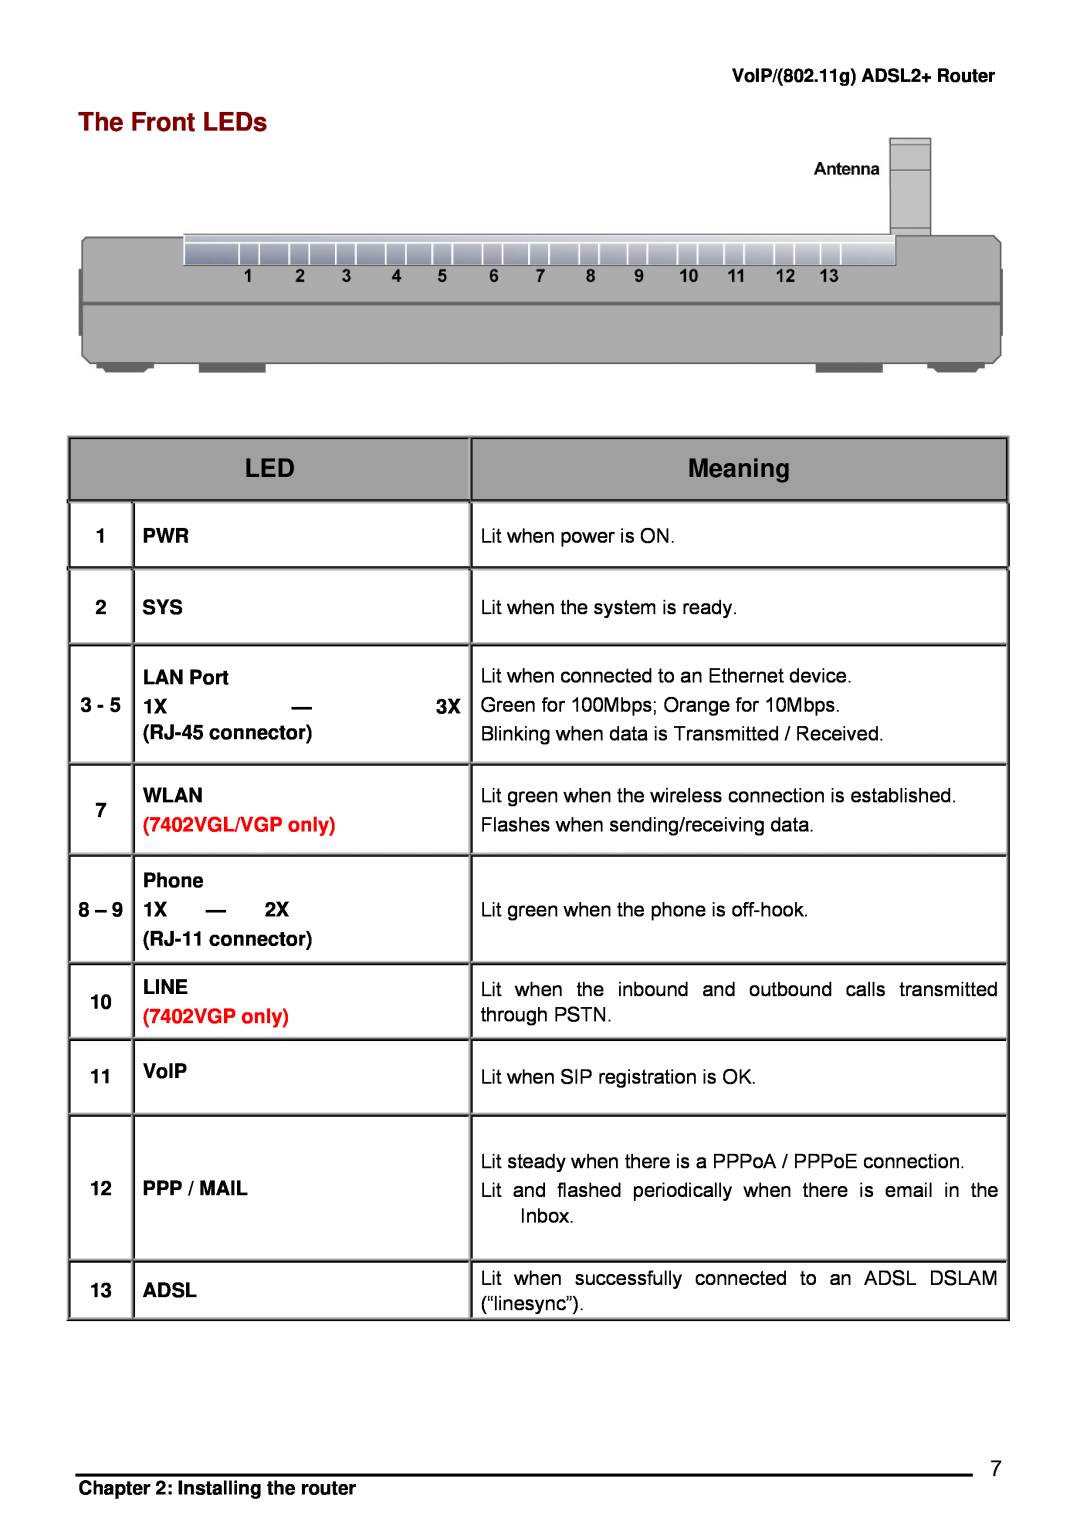 Billion Electric Company 7402VL The Front LEDs, Meaning, PWR 2 SYS, LAN Port, RJ-45 connector, Wlan, 7402VGL/VGP only 